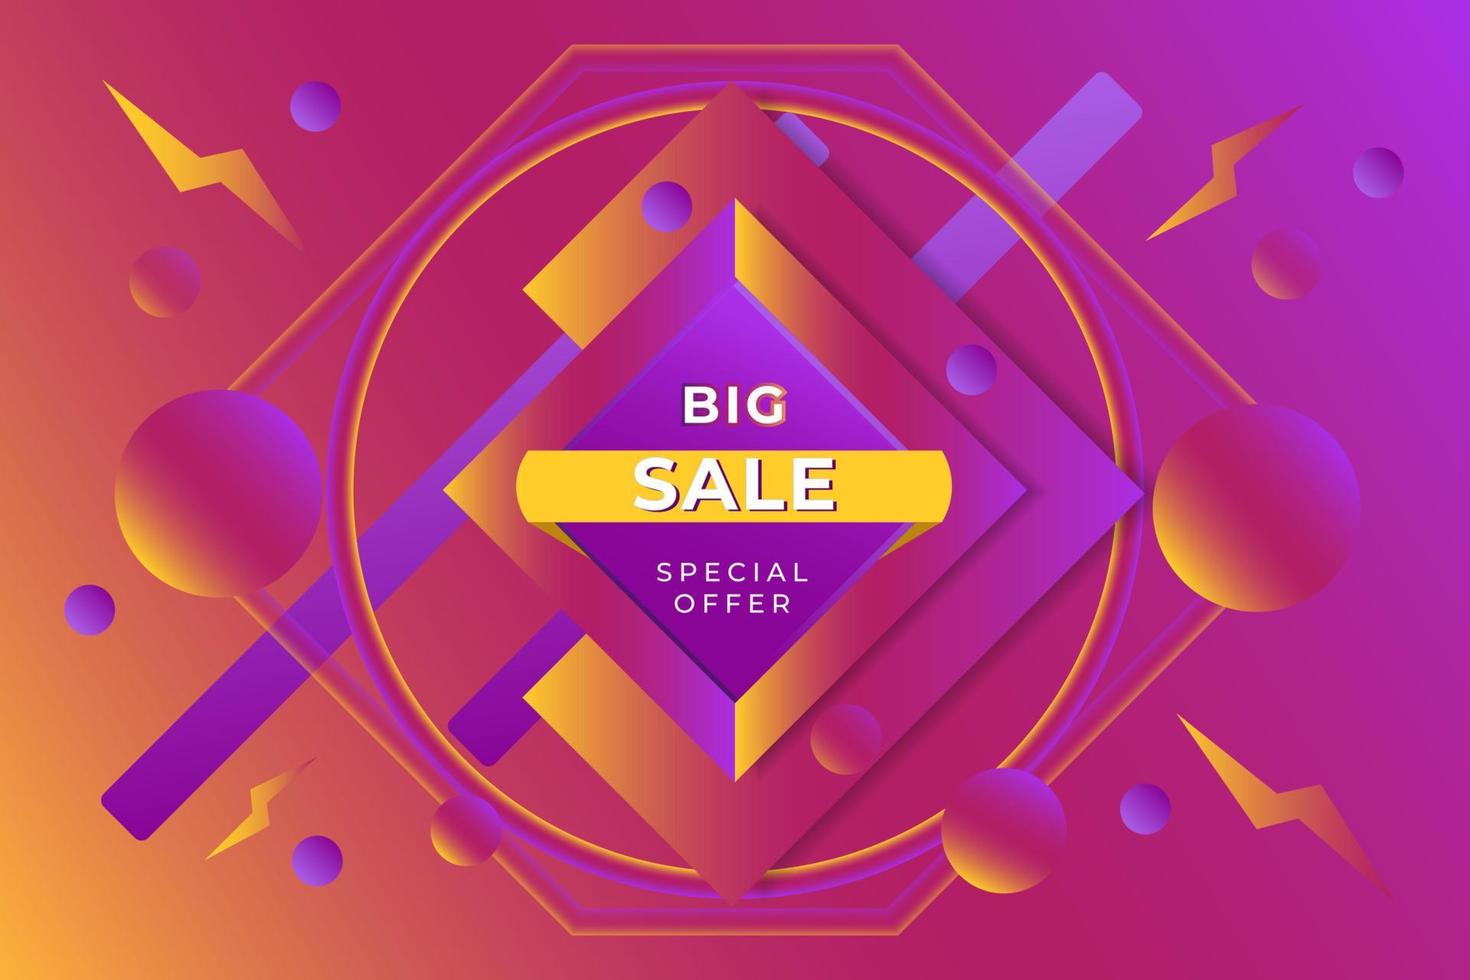 BIG SALE Ilustration 3d media text sale for advertising your business vector eps.